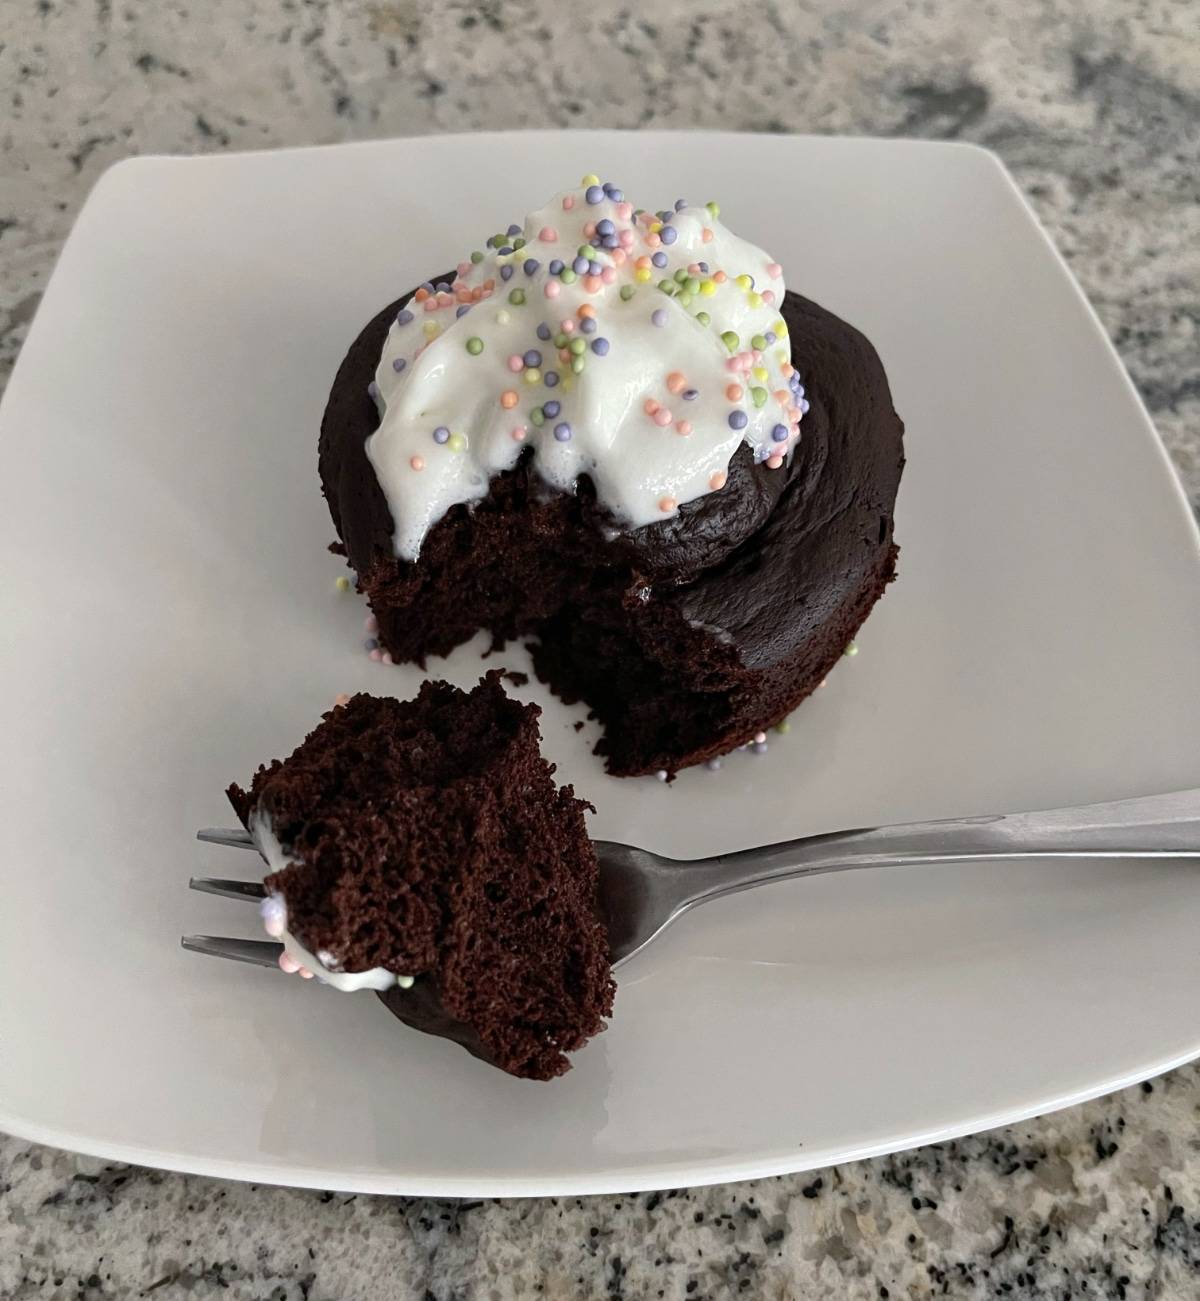 Flourless chocolate mug cake decorated with whipped topping and pastel sprinkles on small white plate with fork.